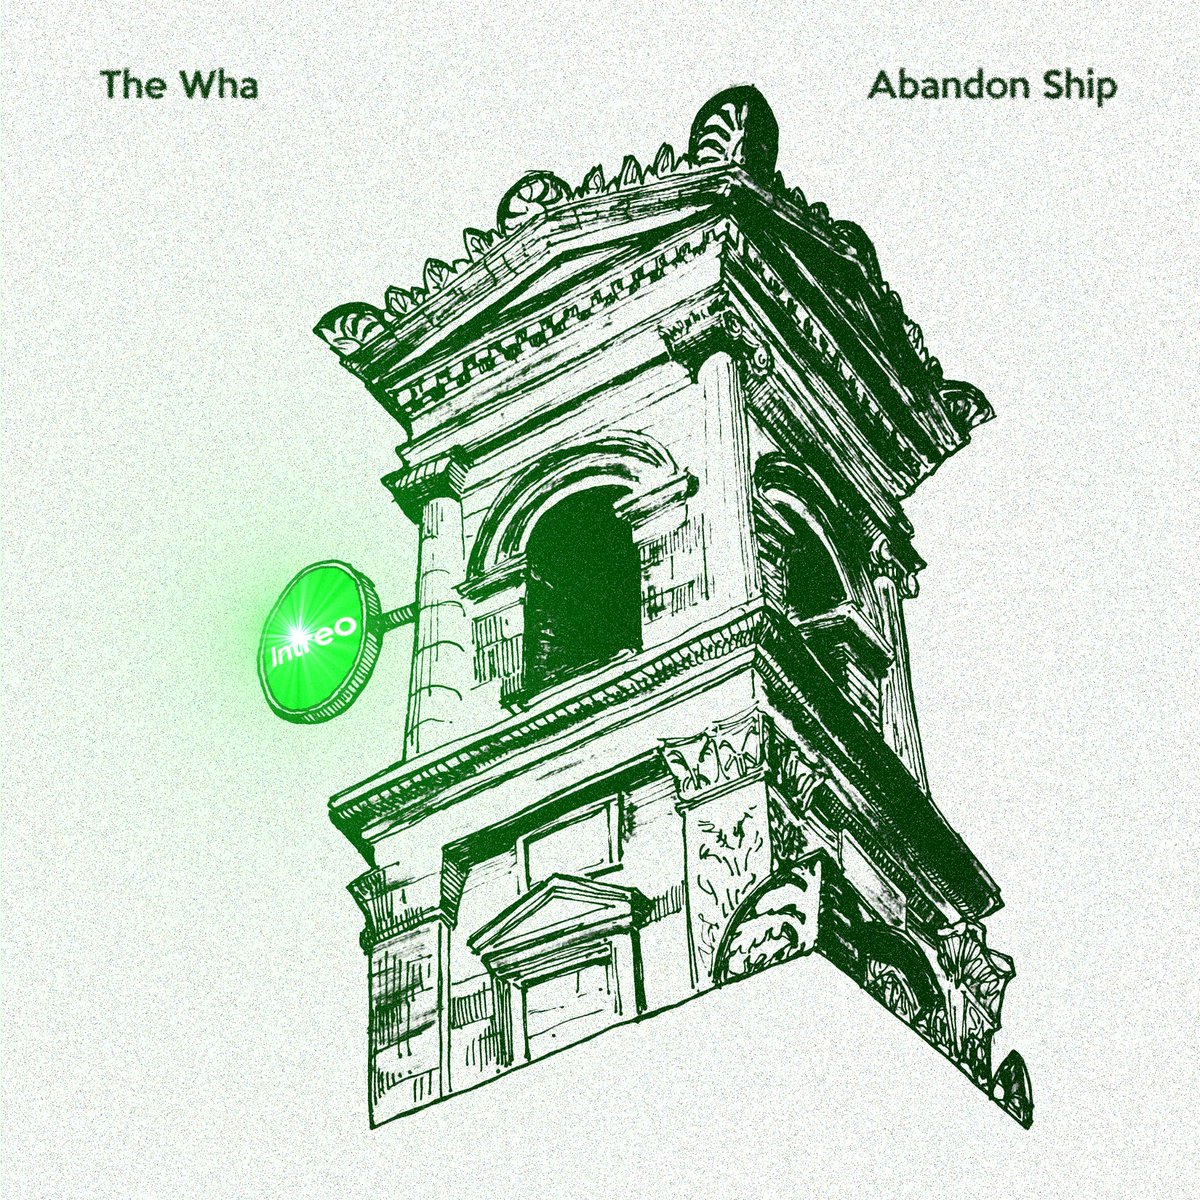 OUR 5th SINGLE 'ABANDON SHIP' IS OUT NOWWW open.spotify.com/track/7ICMFiys…